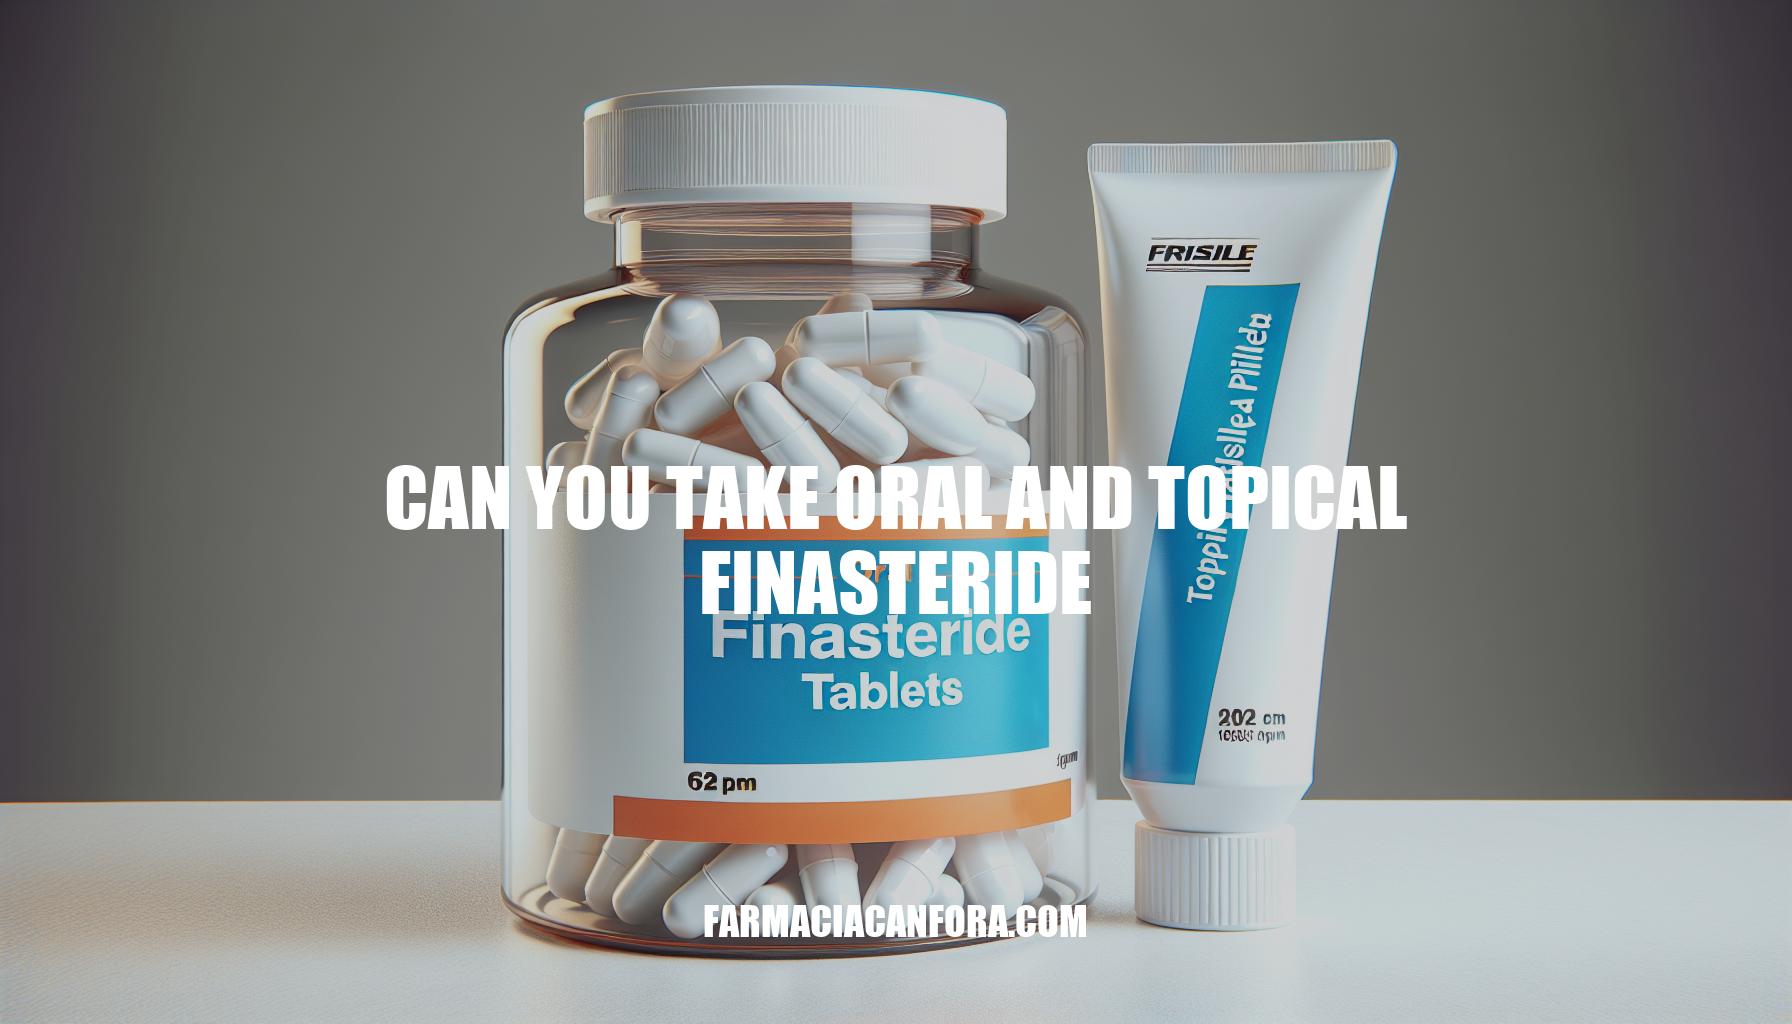 Can You Take Oral and Topical Finasteride Together?